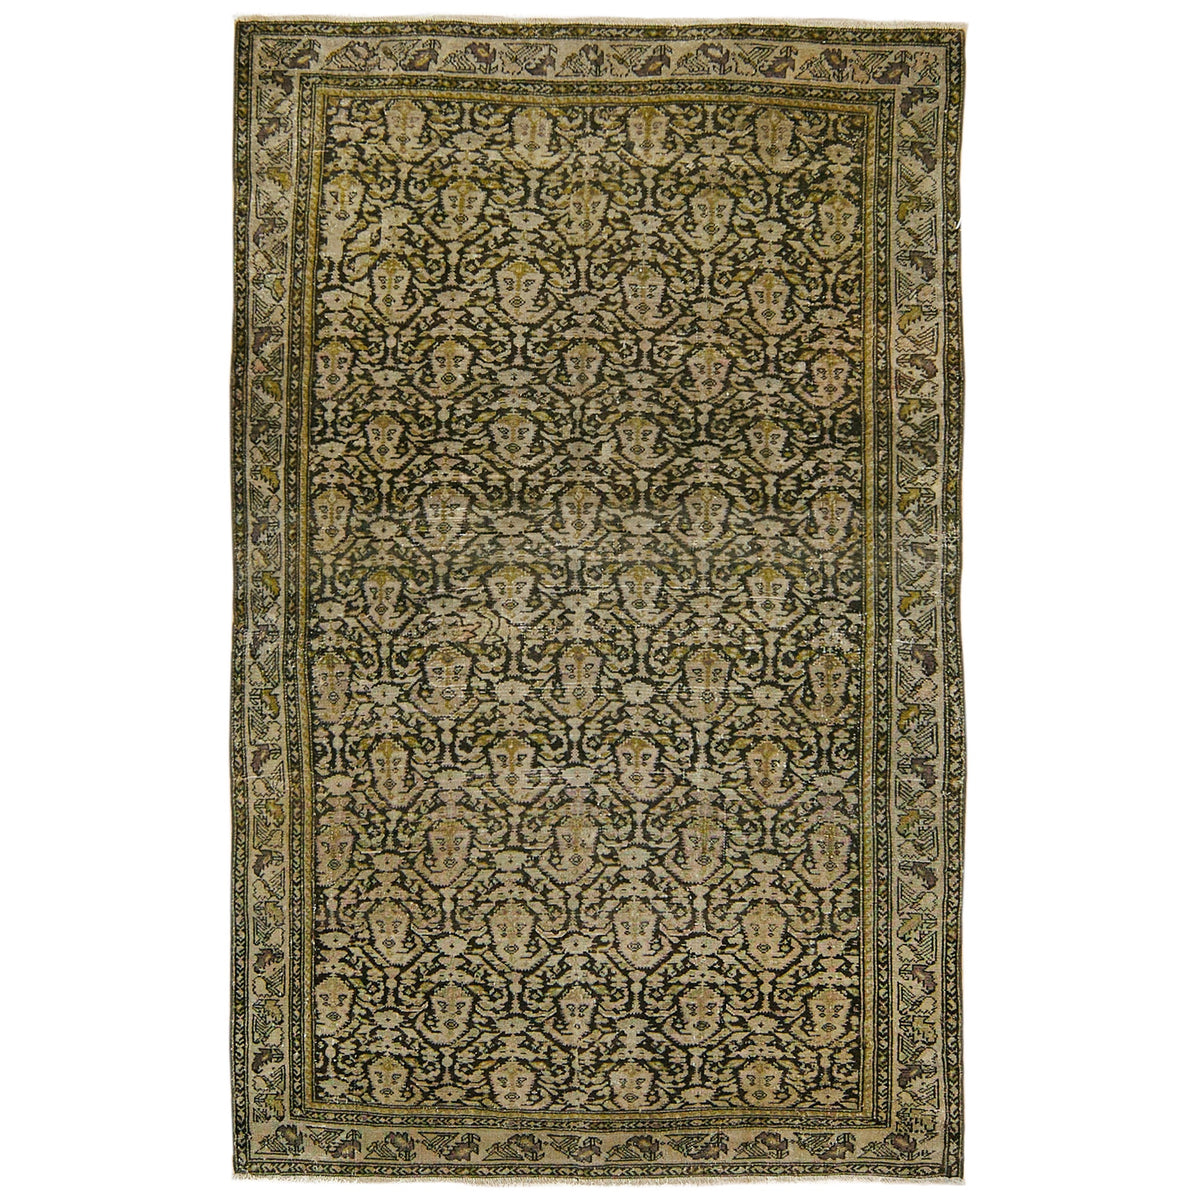 Victoria - Tapestry of Tradition | Kuden Rugs